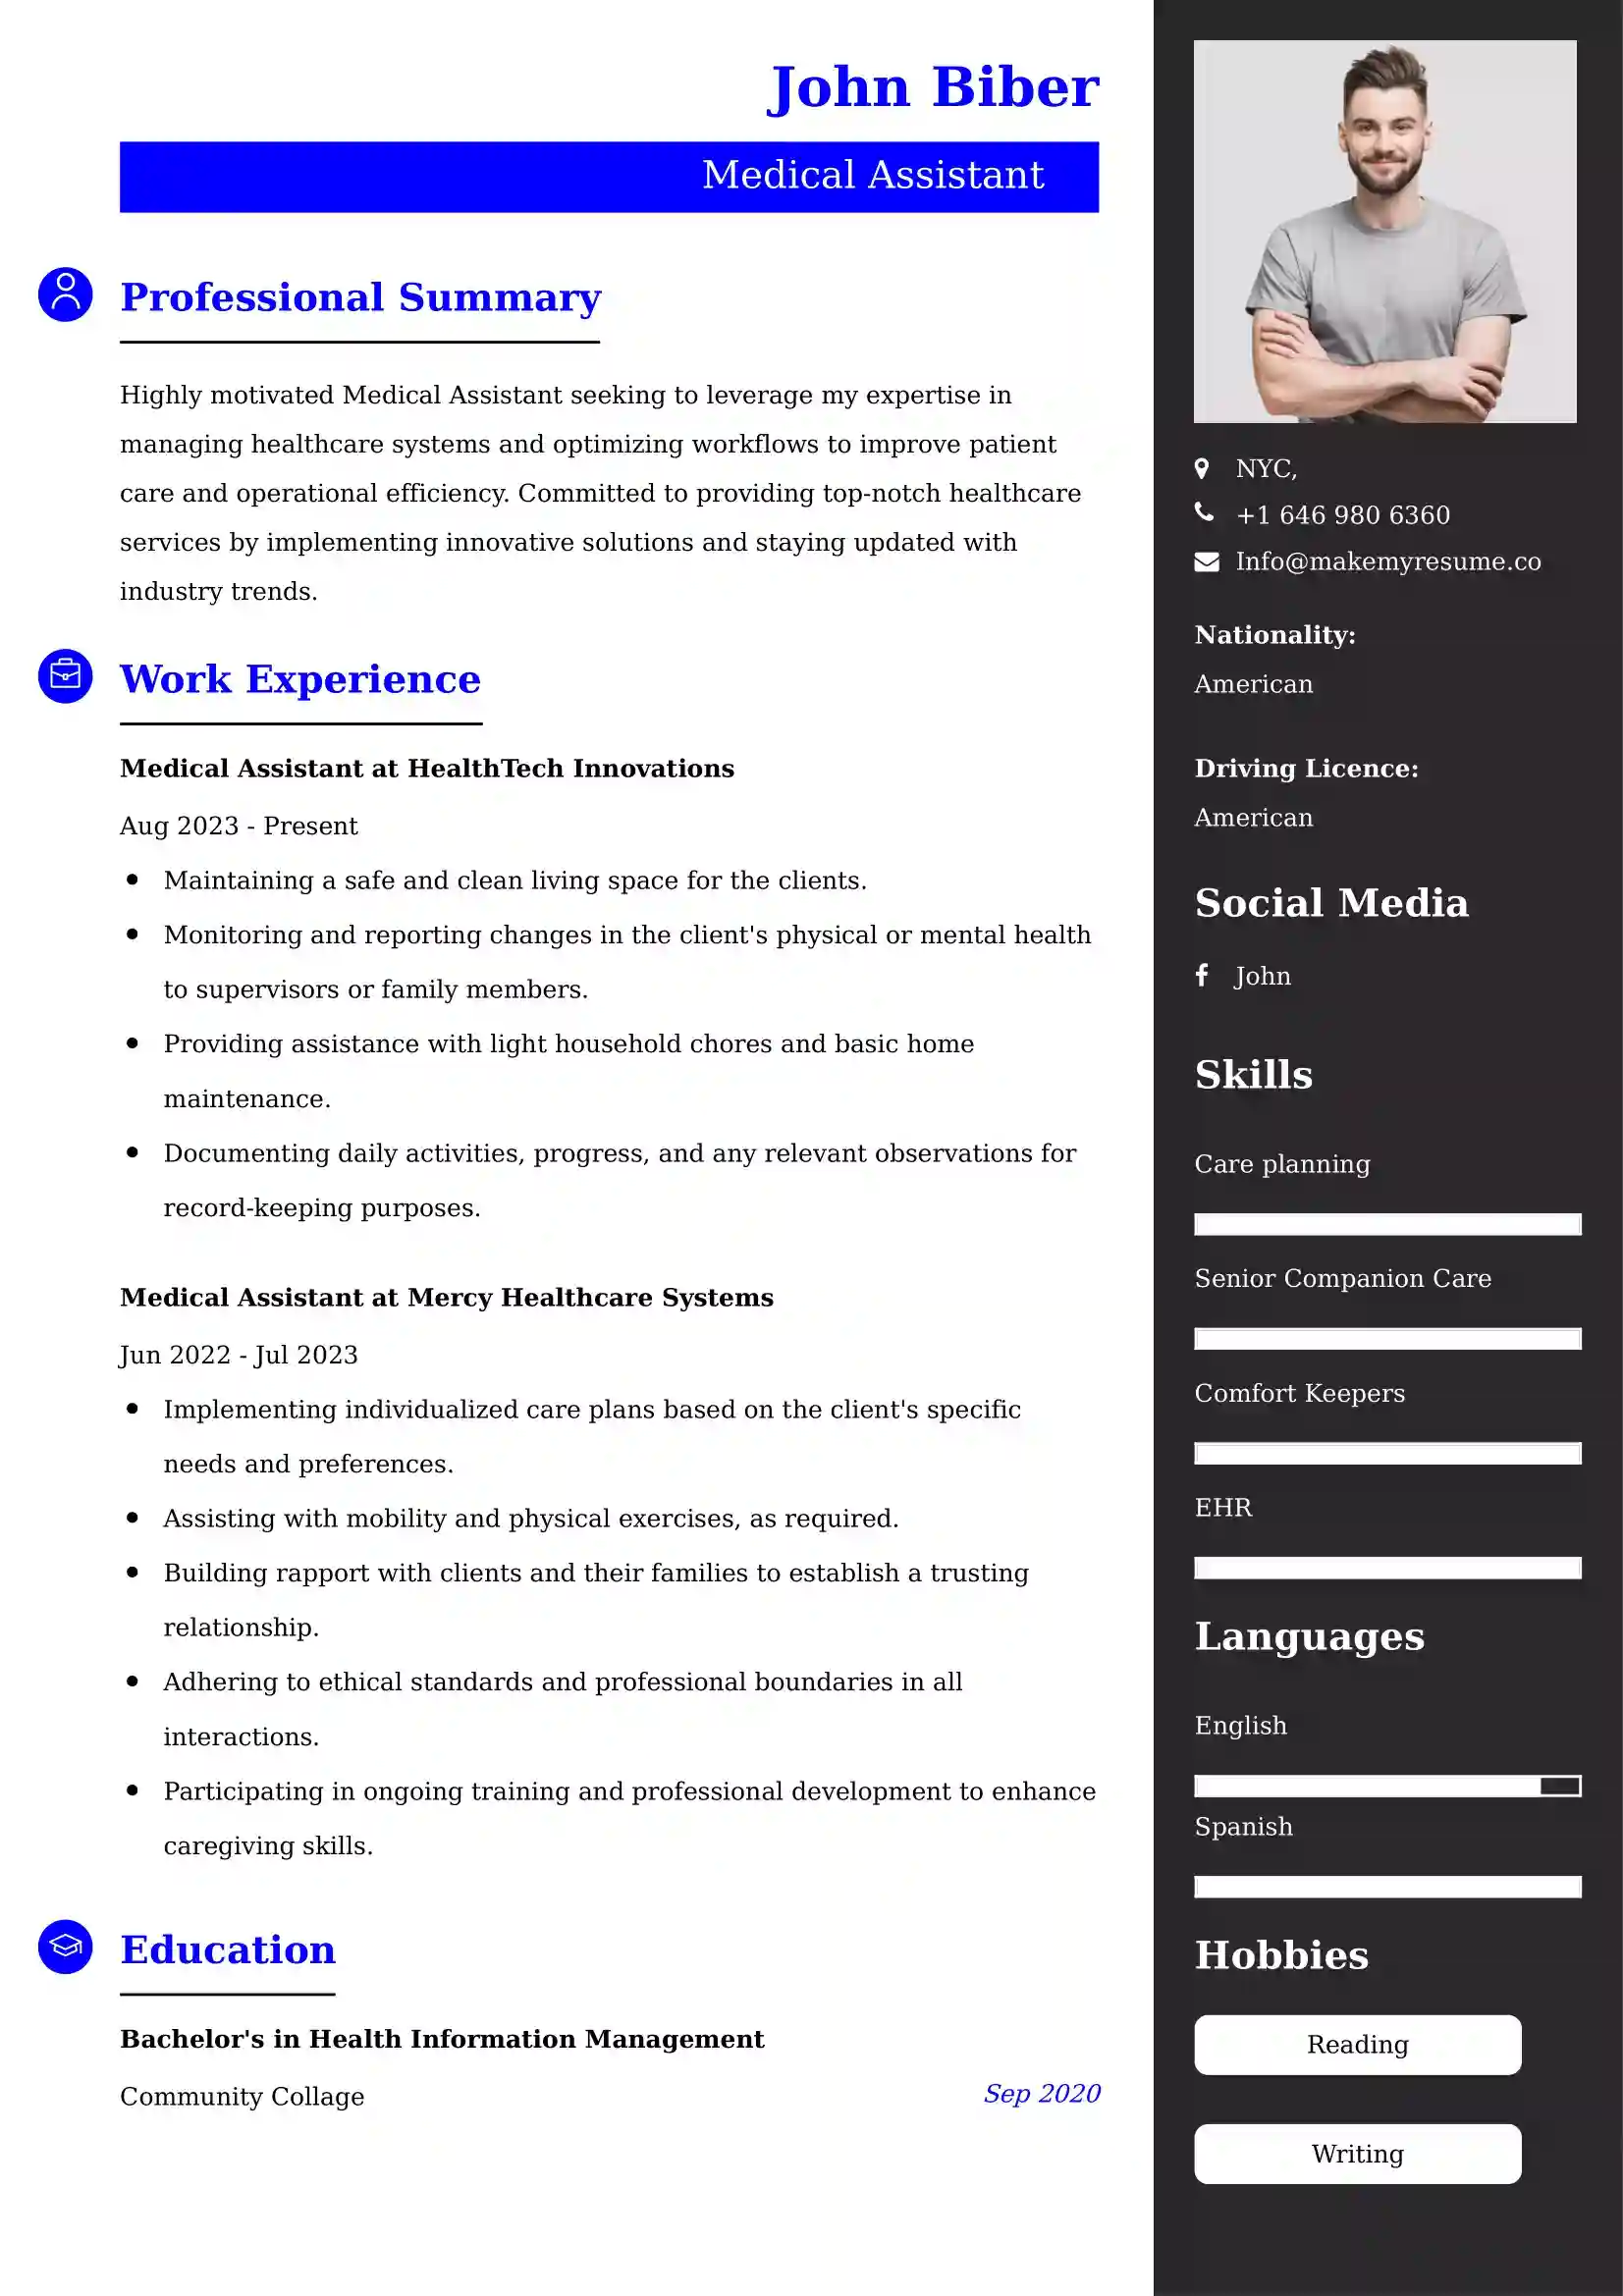 Medical Assistant Resume Examples - UK Format, Latest Template.